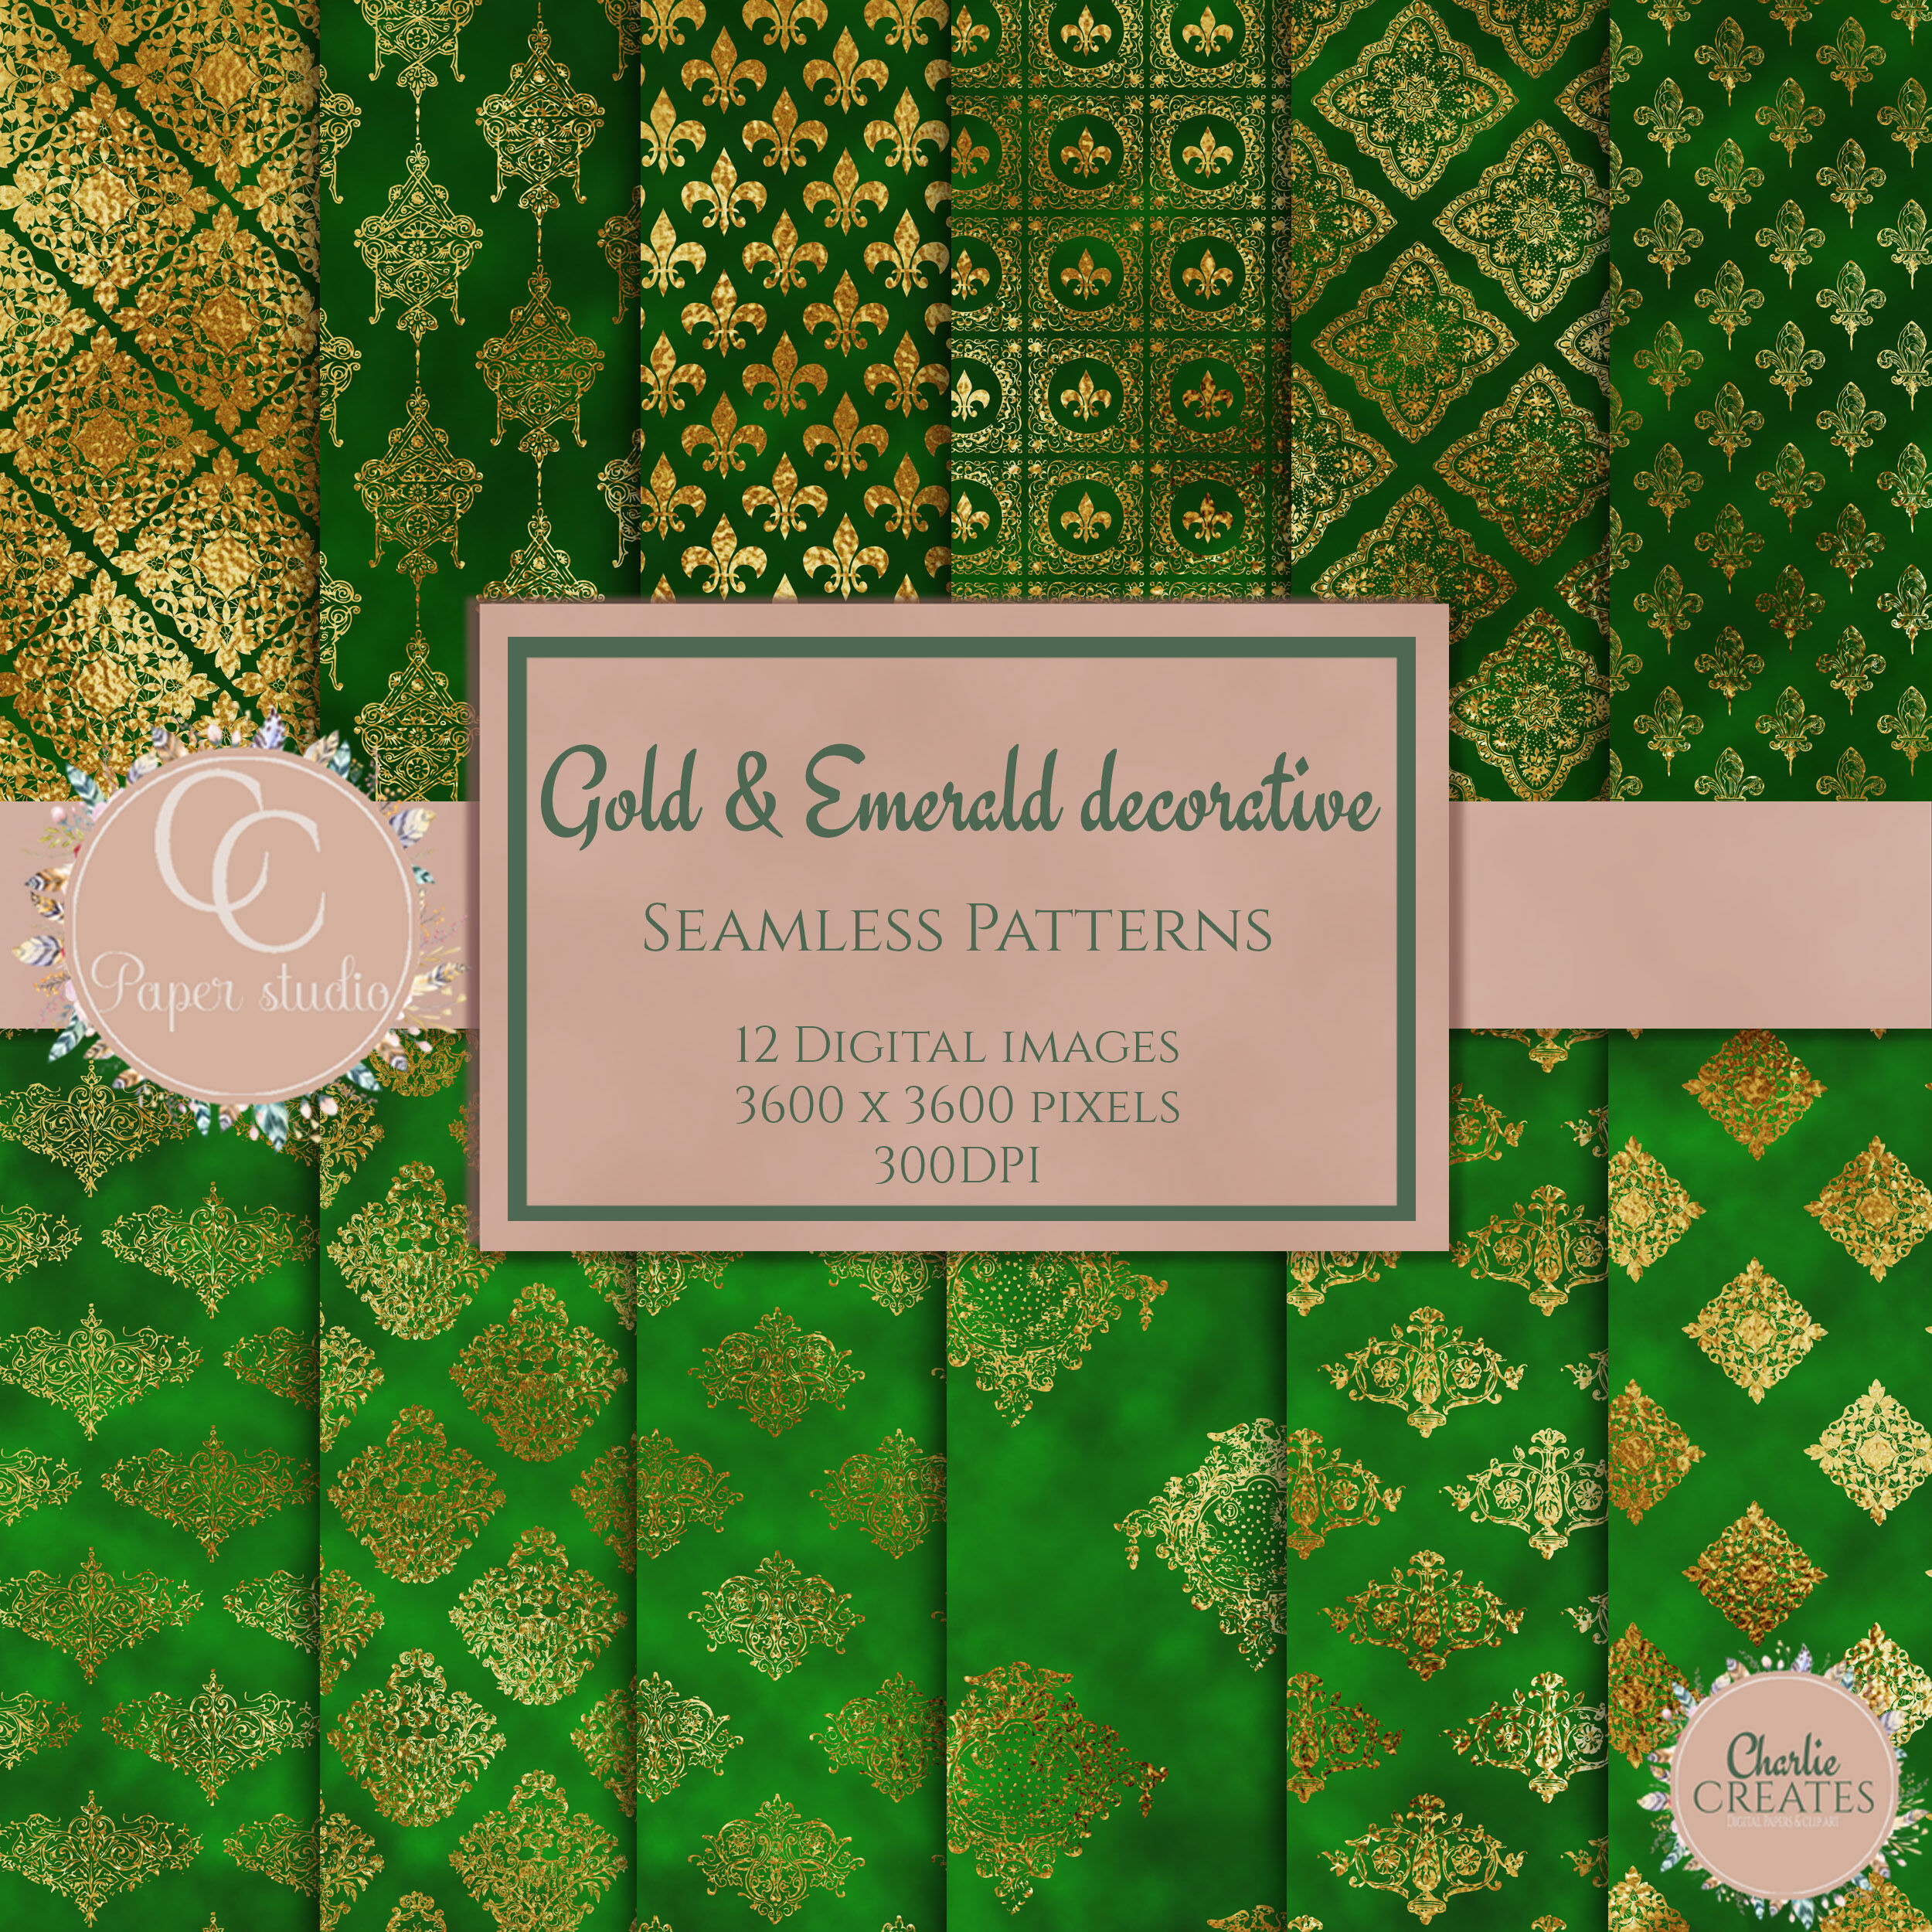 Green & gold damask decorative papers By CC Paper Studio | TheHungryJPEG